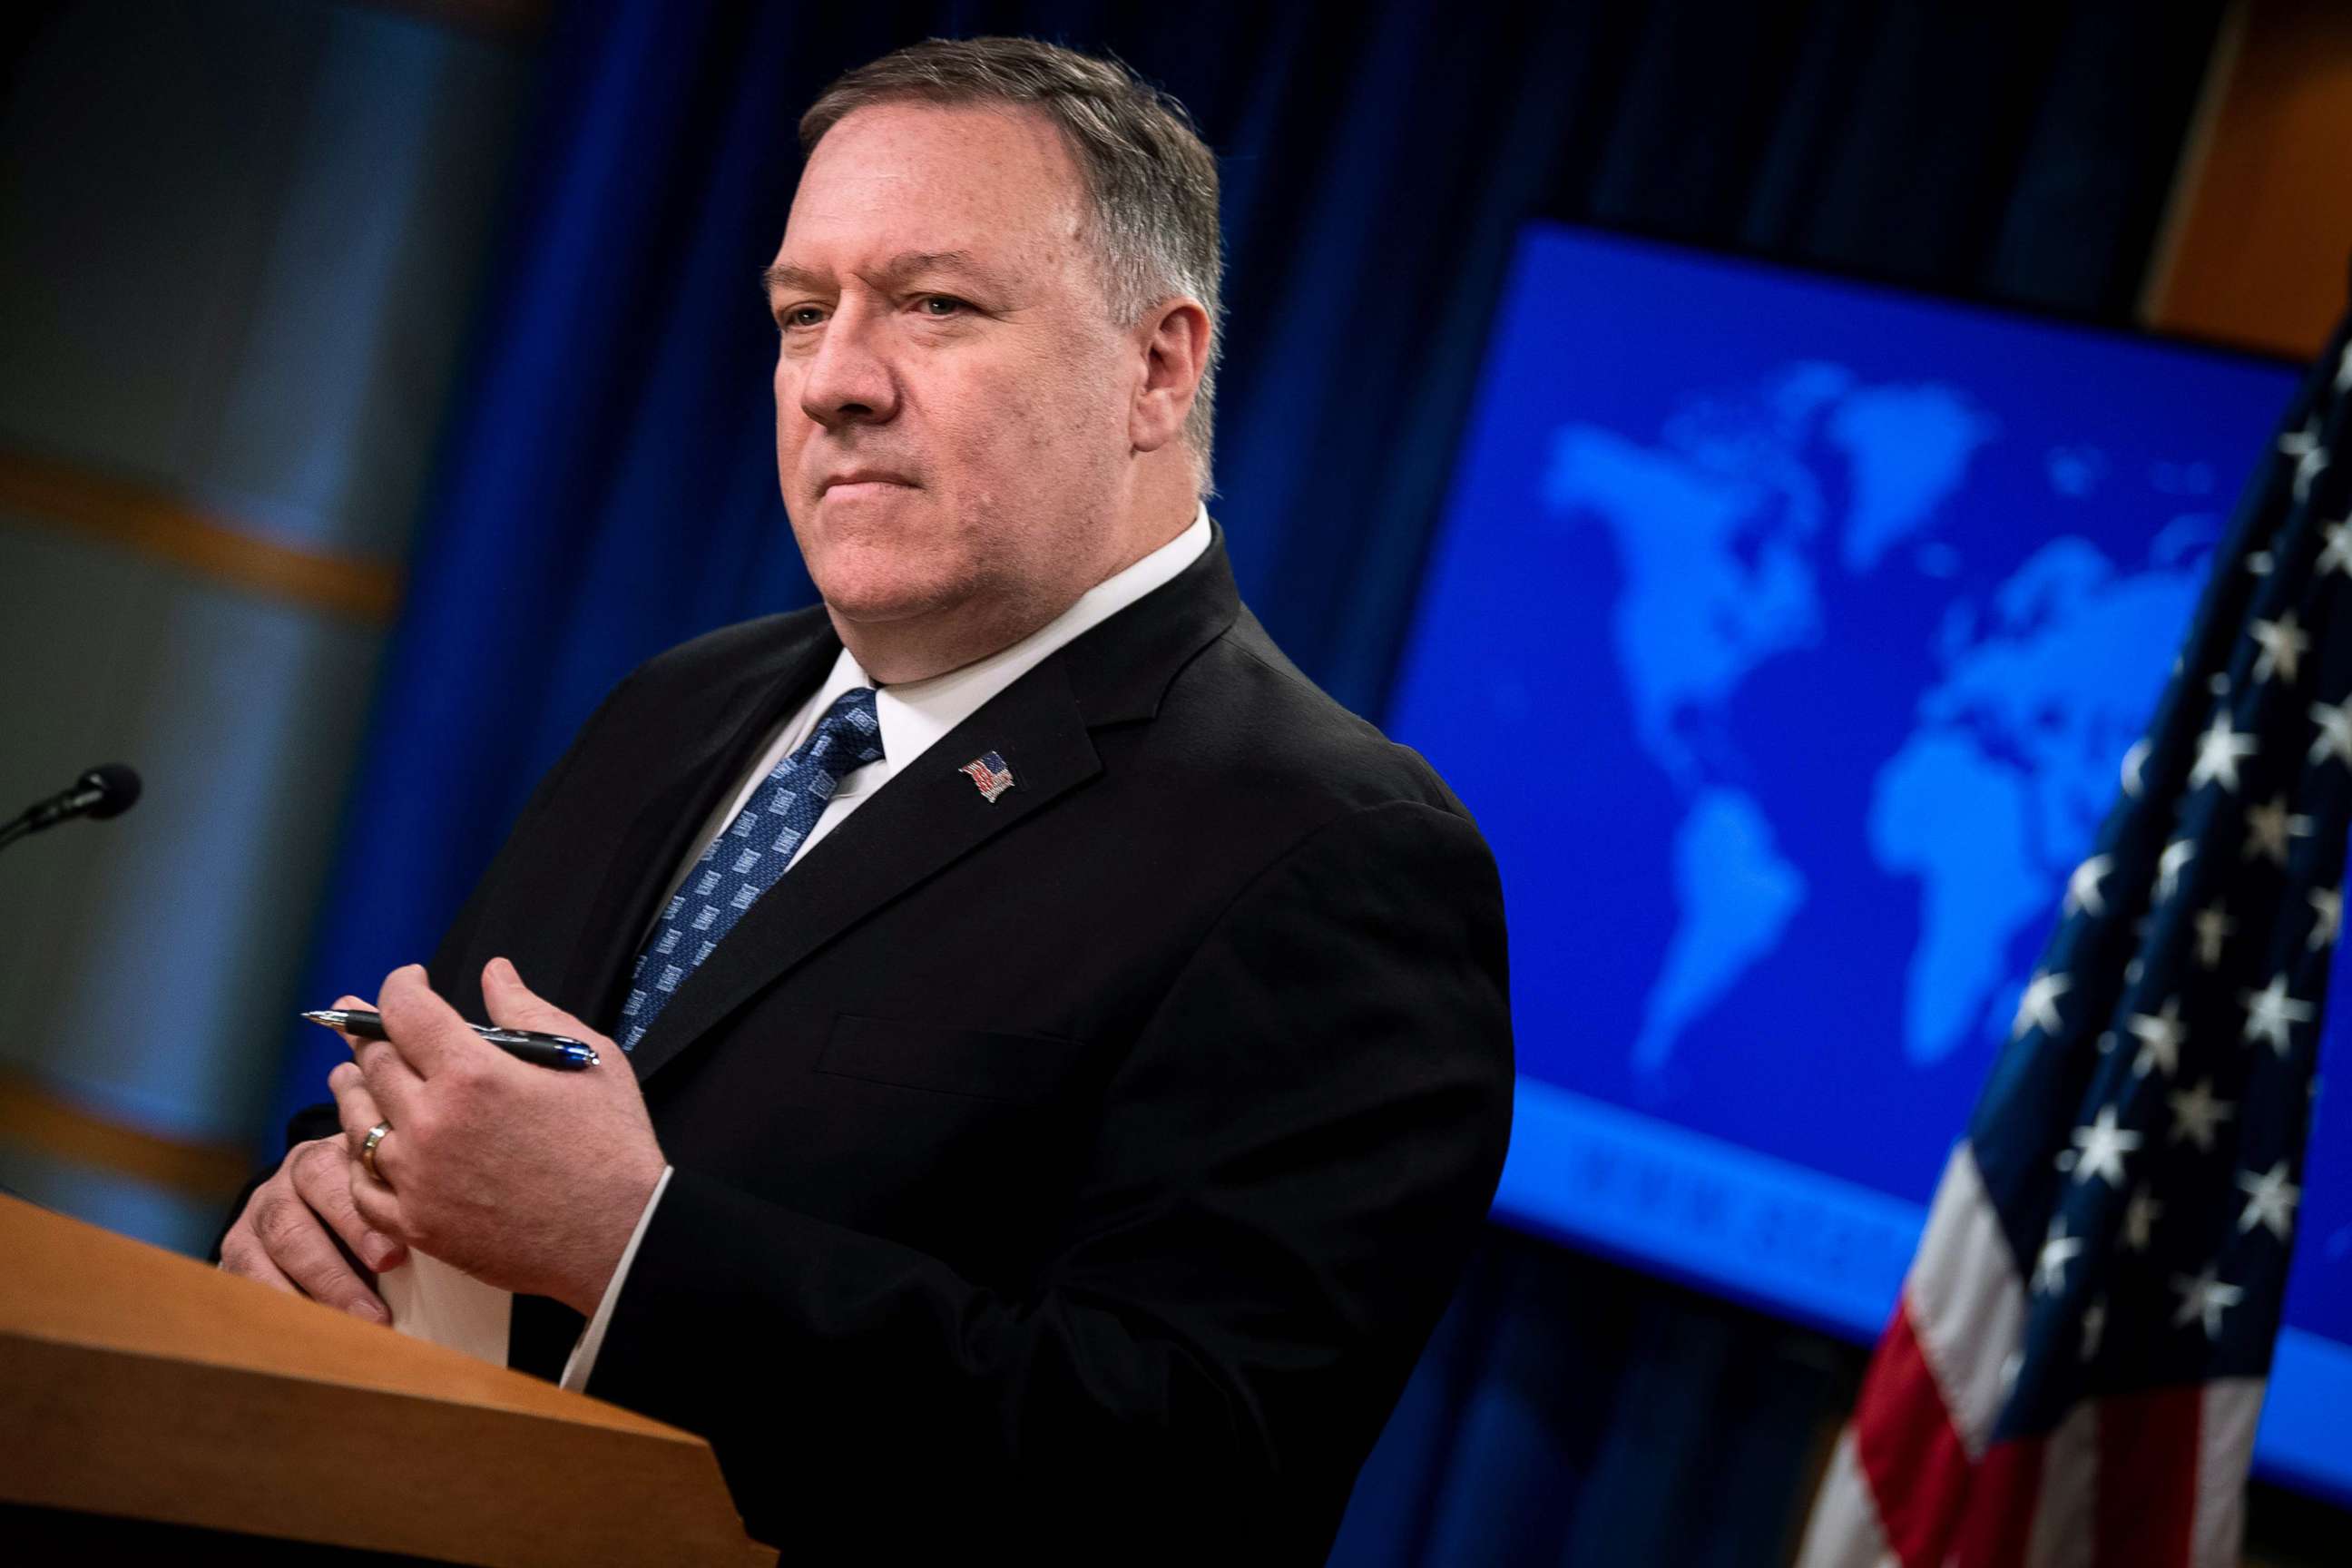 PHOTO: Secretary of State Mike Pompeo speaks during a briefing at the U.S. Department of State, Feb. 25, 2020, in Washington, D.C.